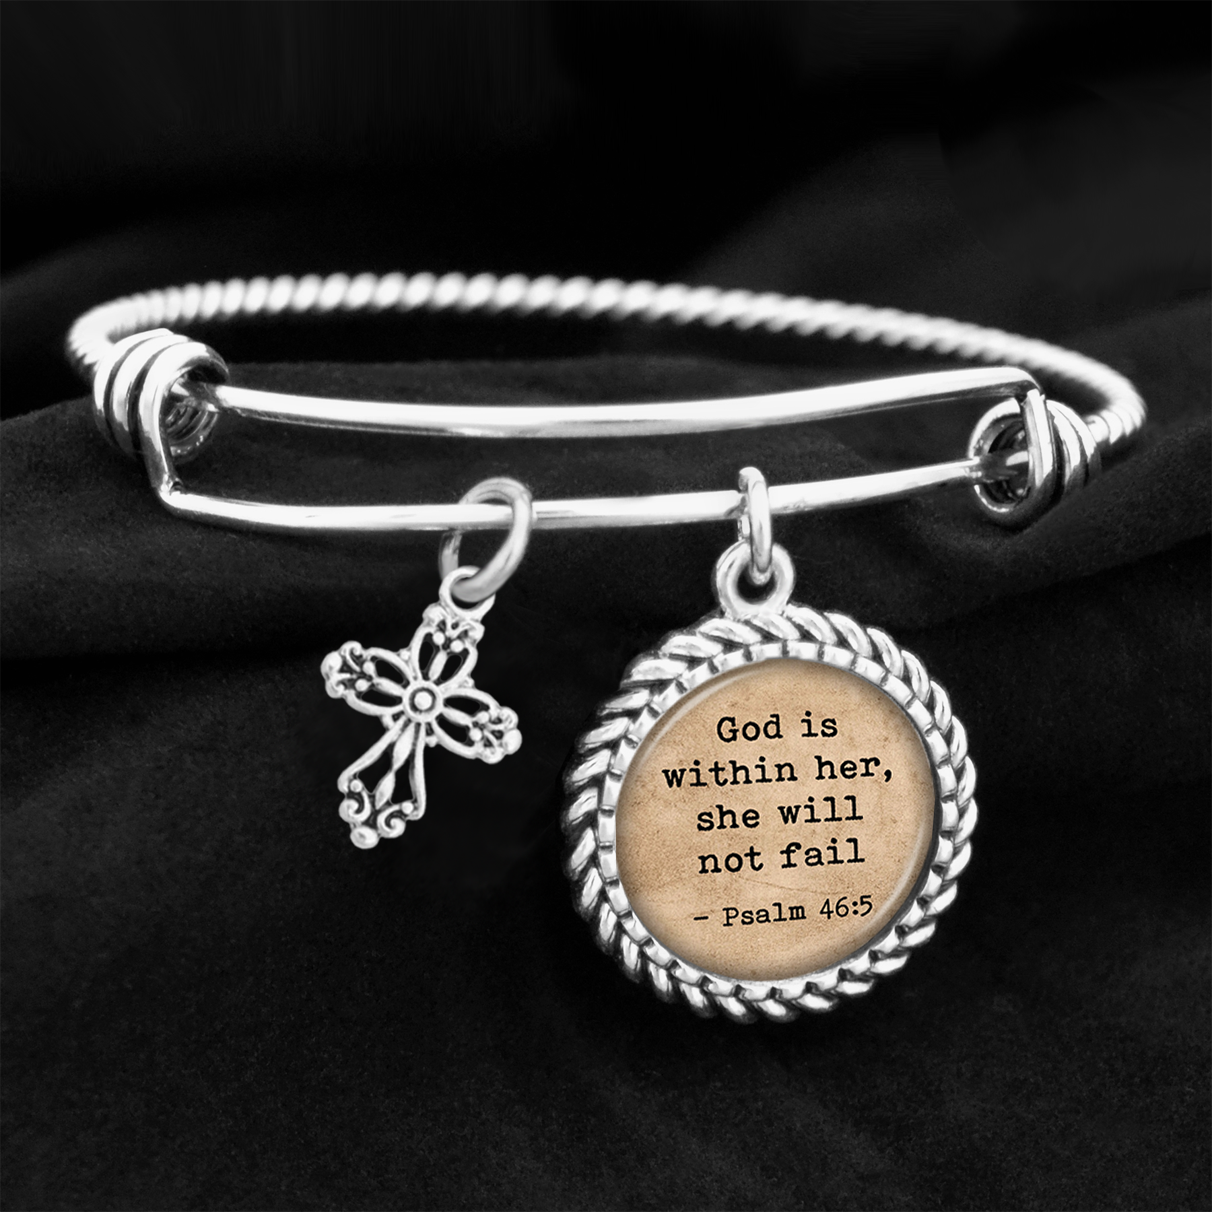 God Is Within Her, She Will Not Fail Psalm 46:5 Charm Bracelet